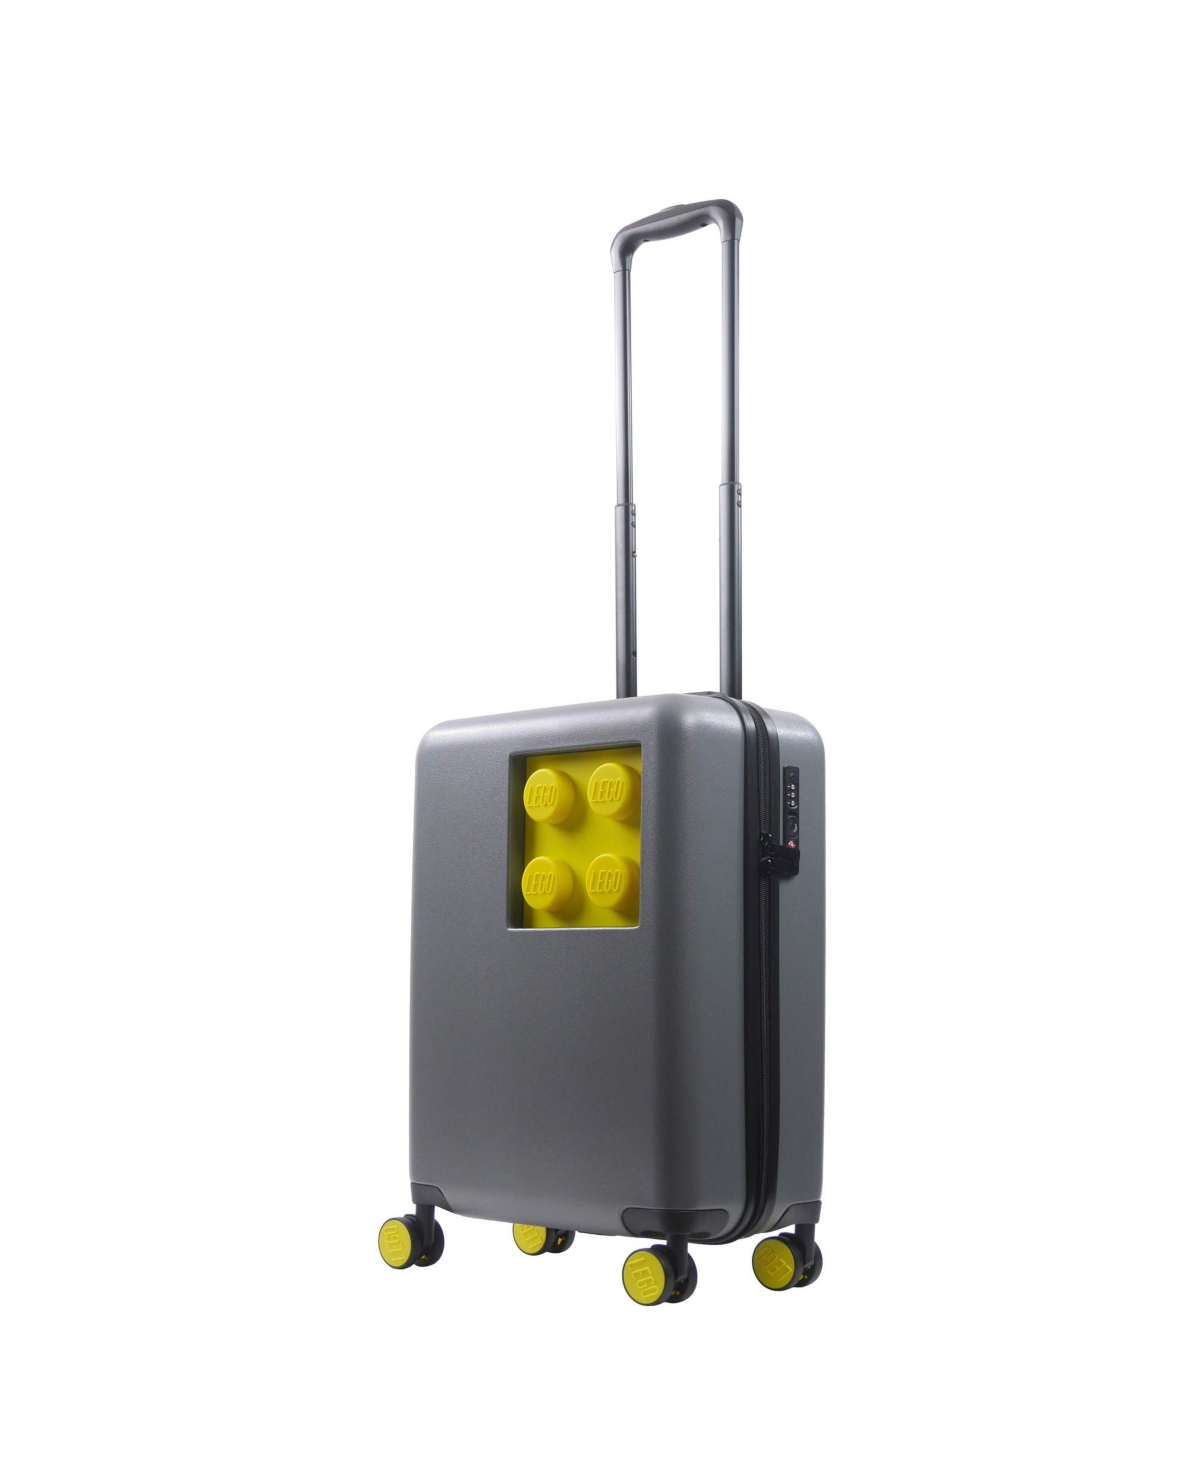 Lego Signature Brick 2X2 Trolley 21" Carry-on Luggage - Gray, Yellow